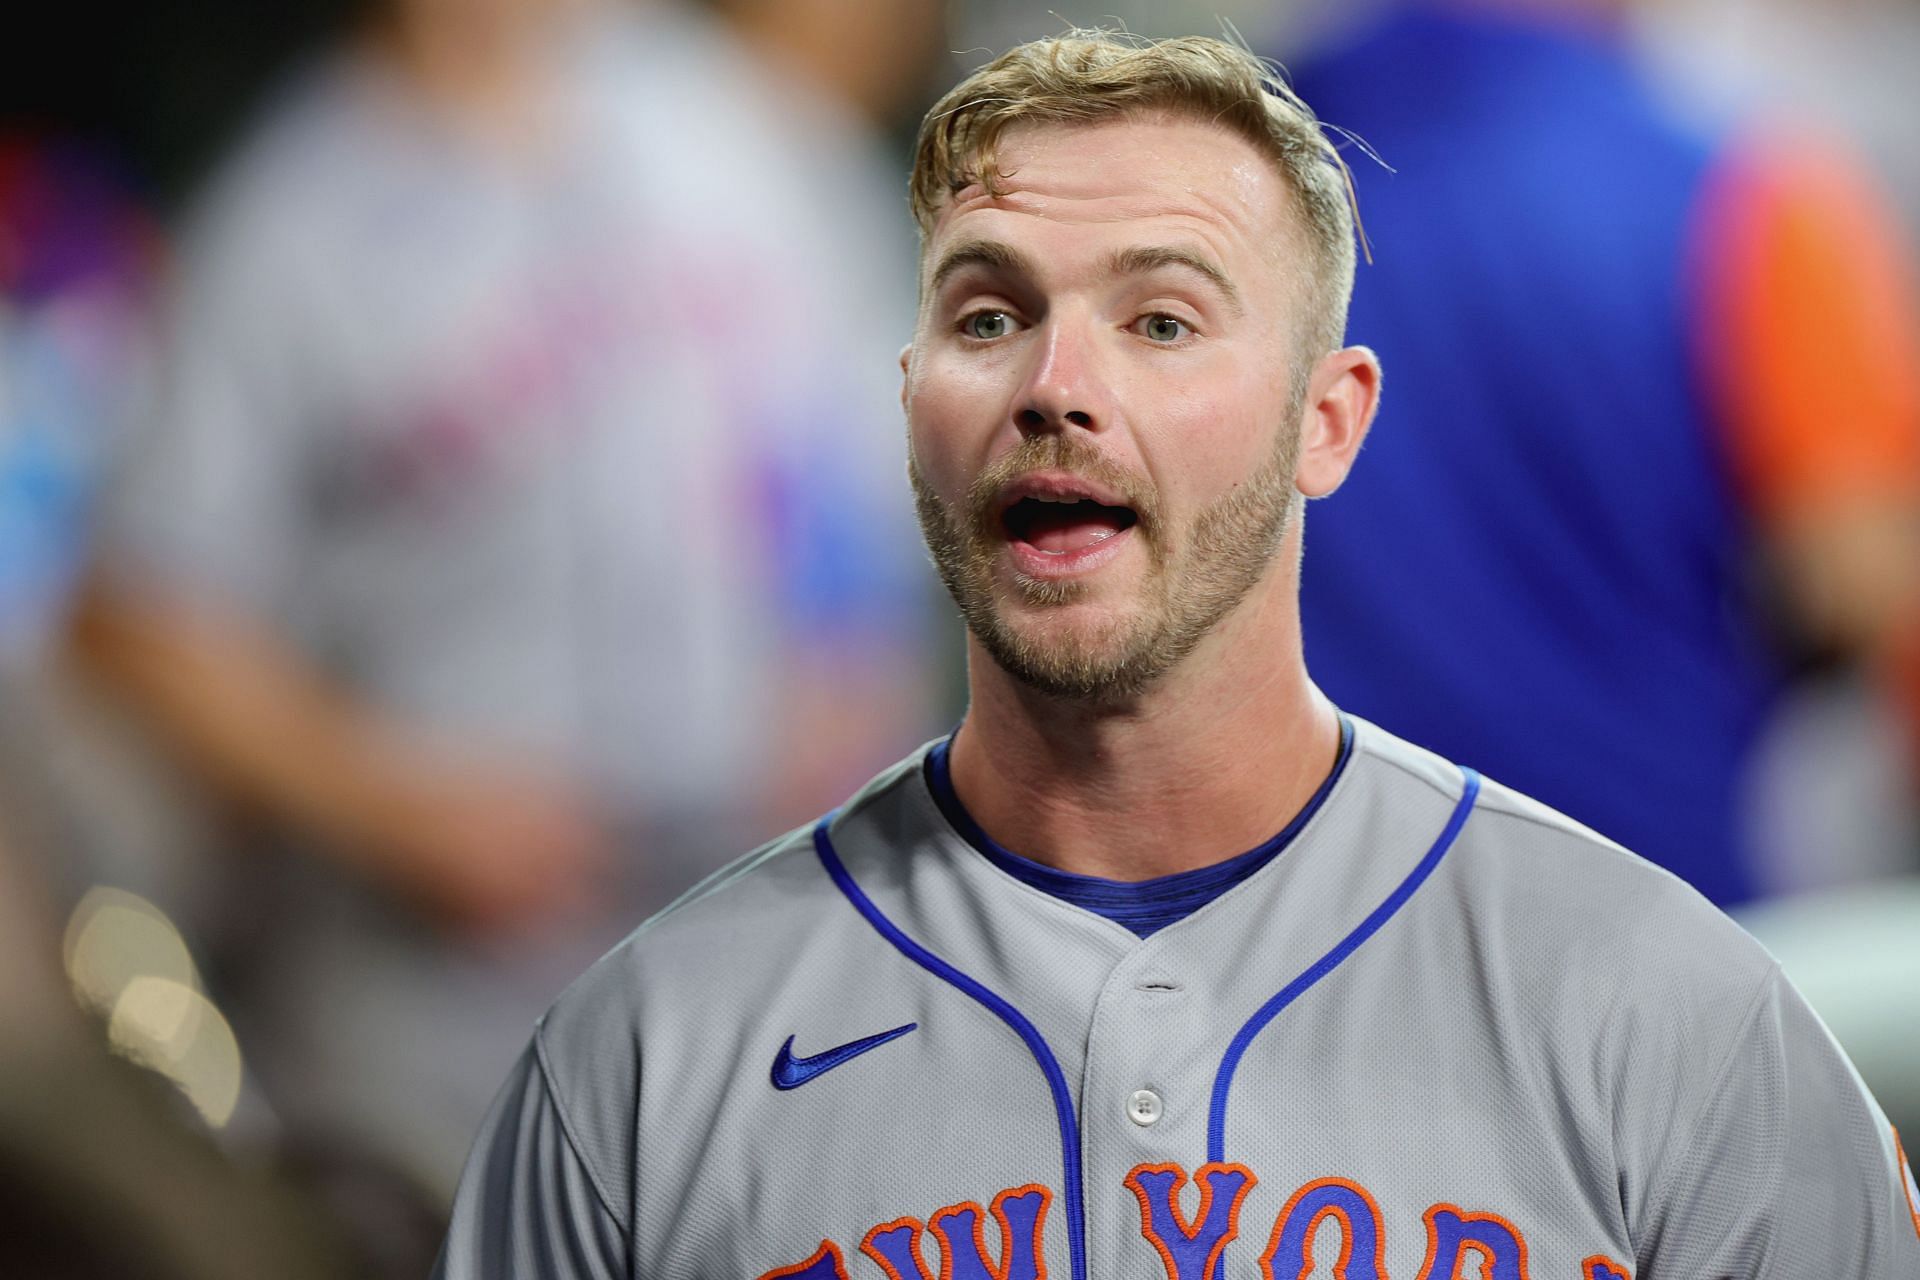 Mets' Pete Alonso explains why he shaved his mustache mid-game